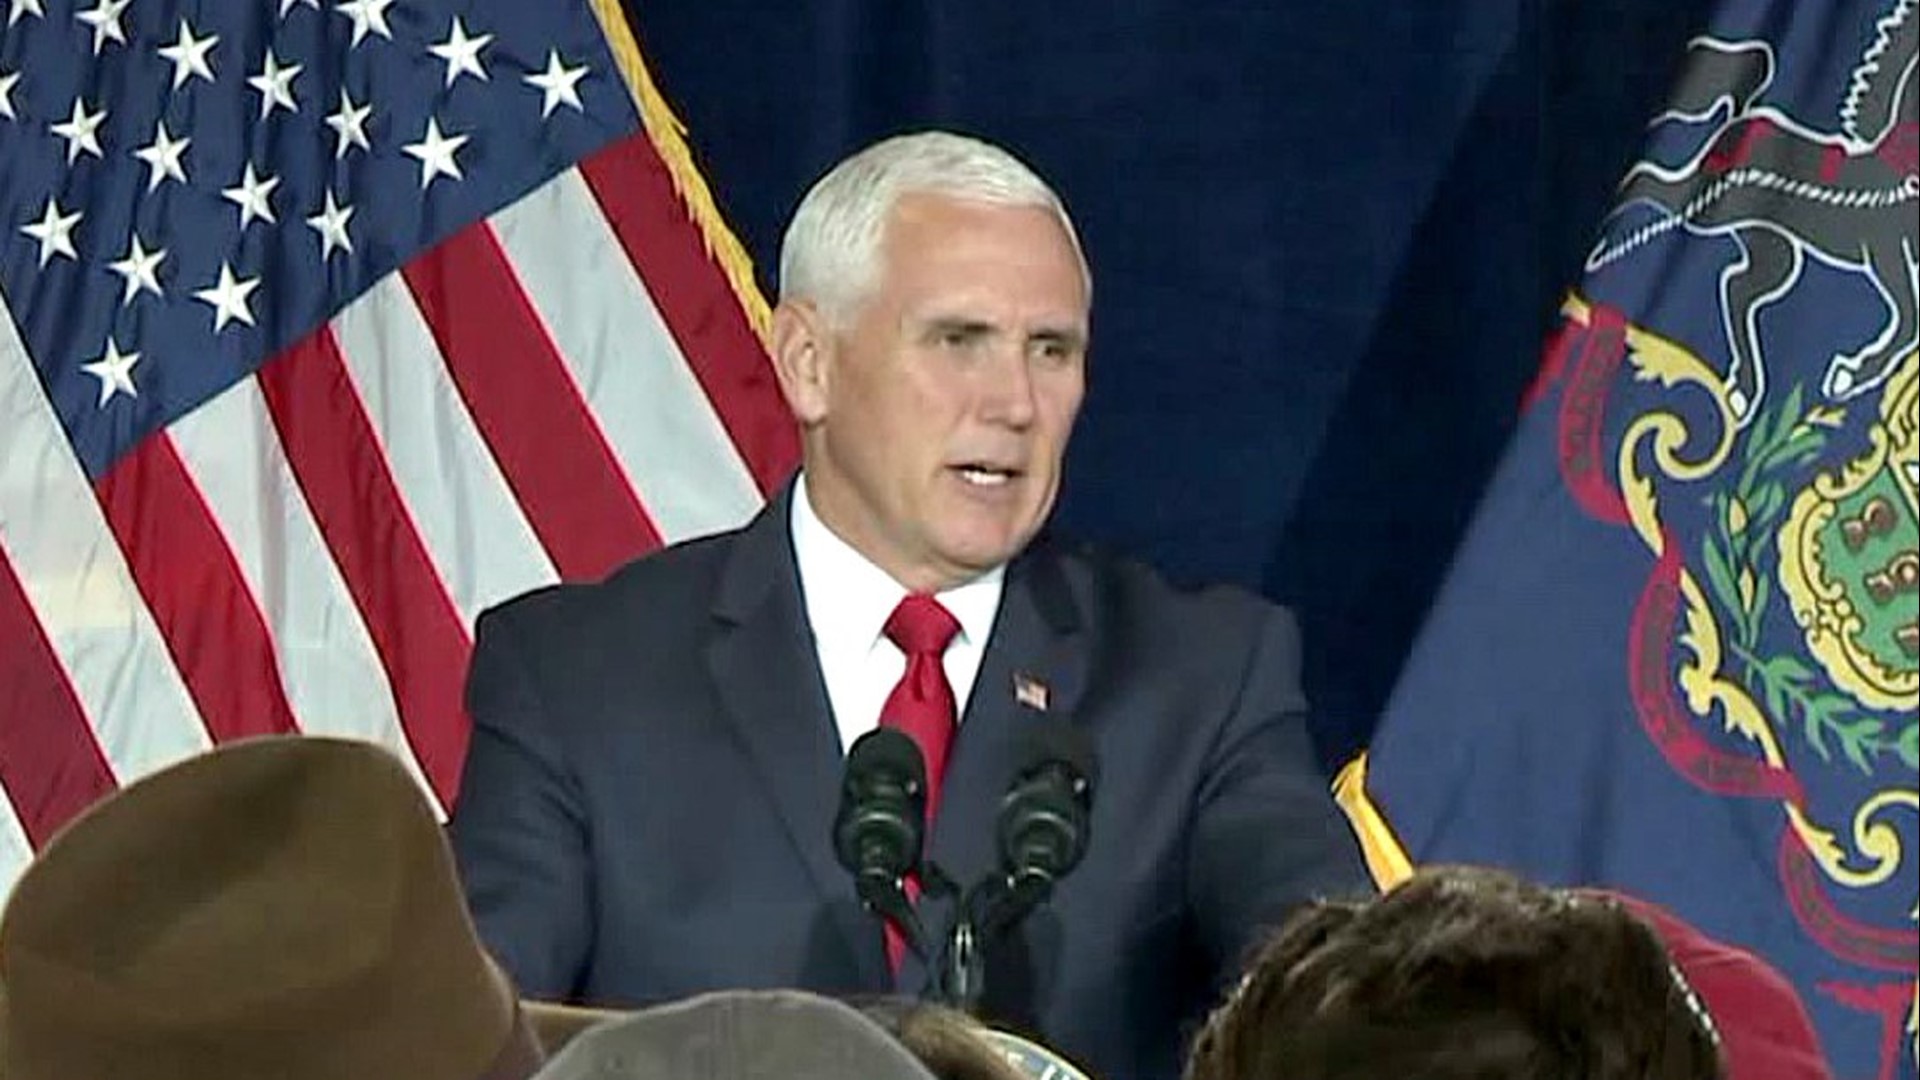 The vice president is set to attend a "Workers of Trump" event in Exeter.